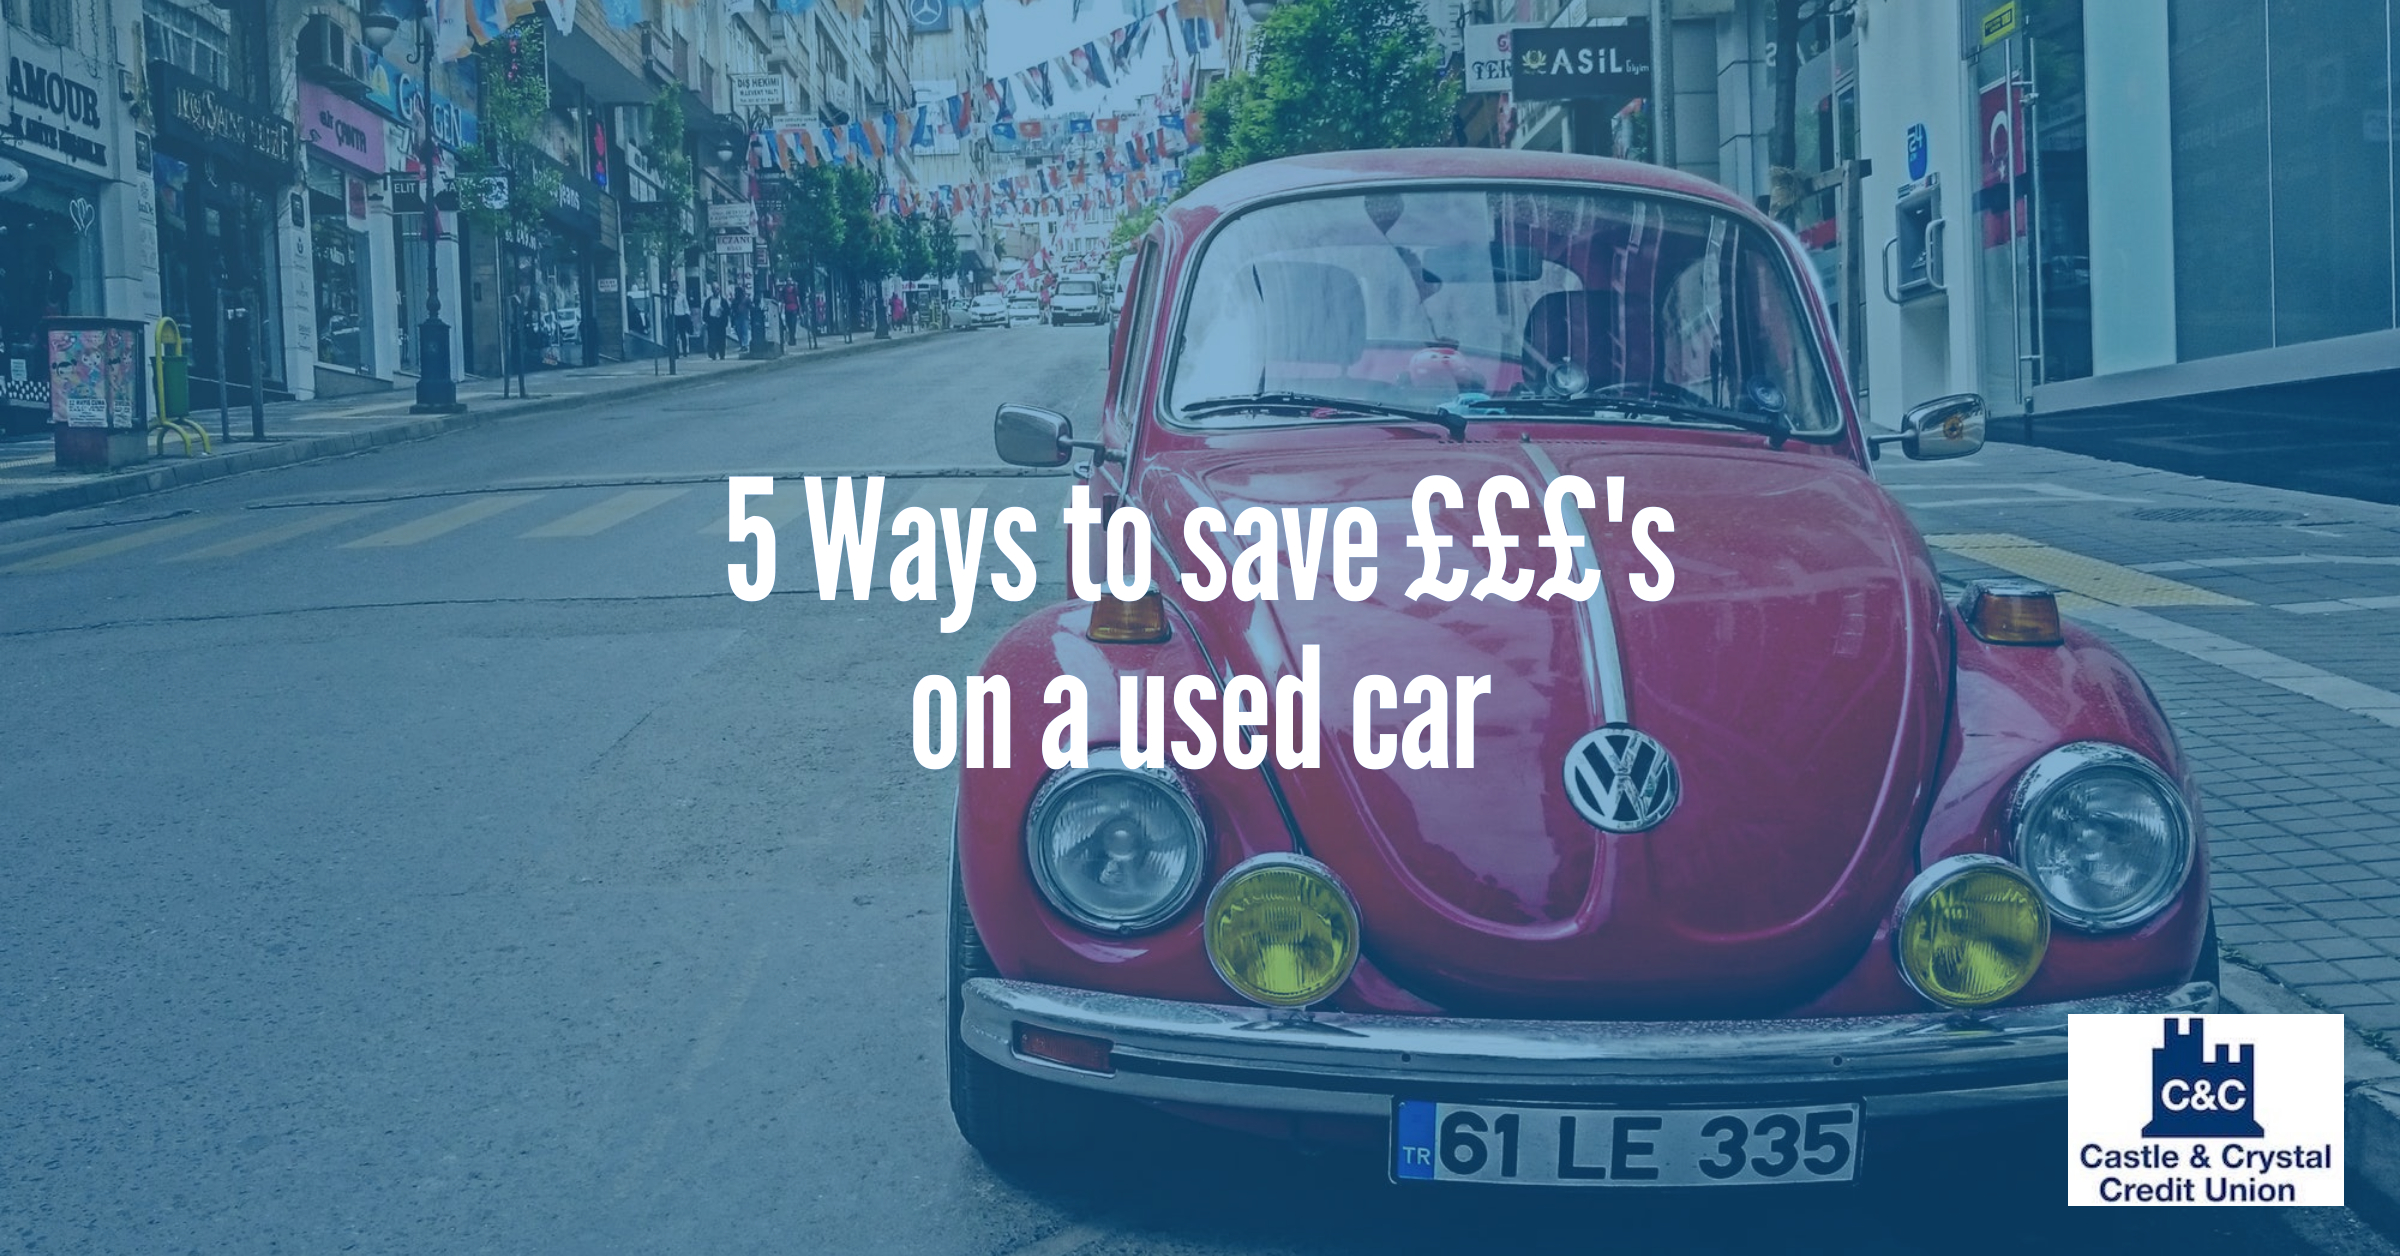 5 Ways to save £££'s on a used car